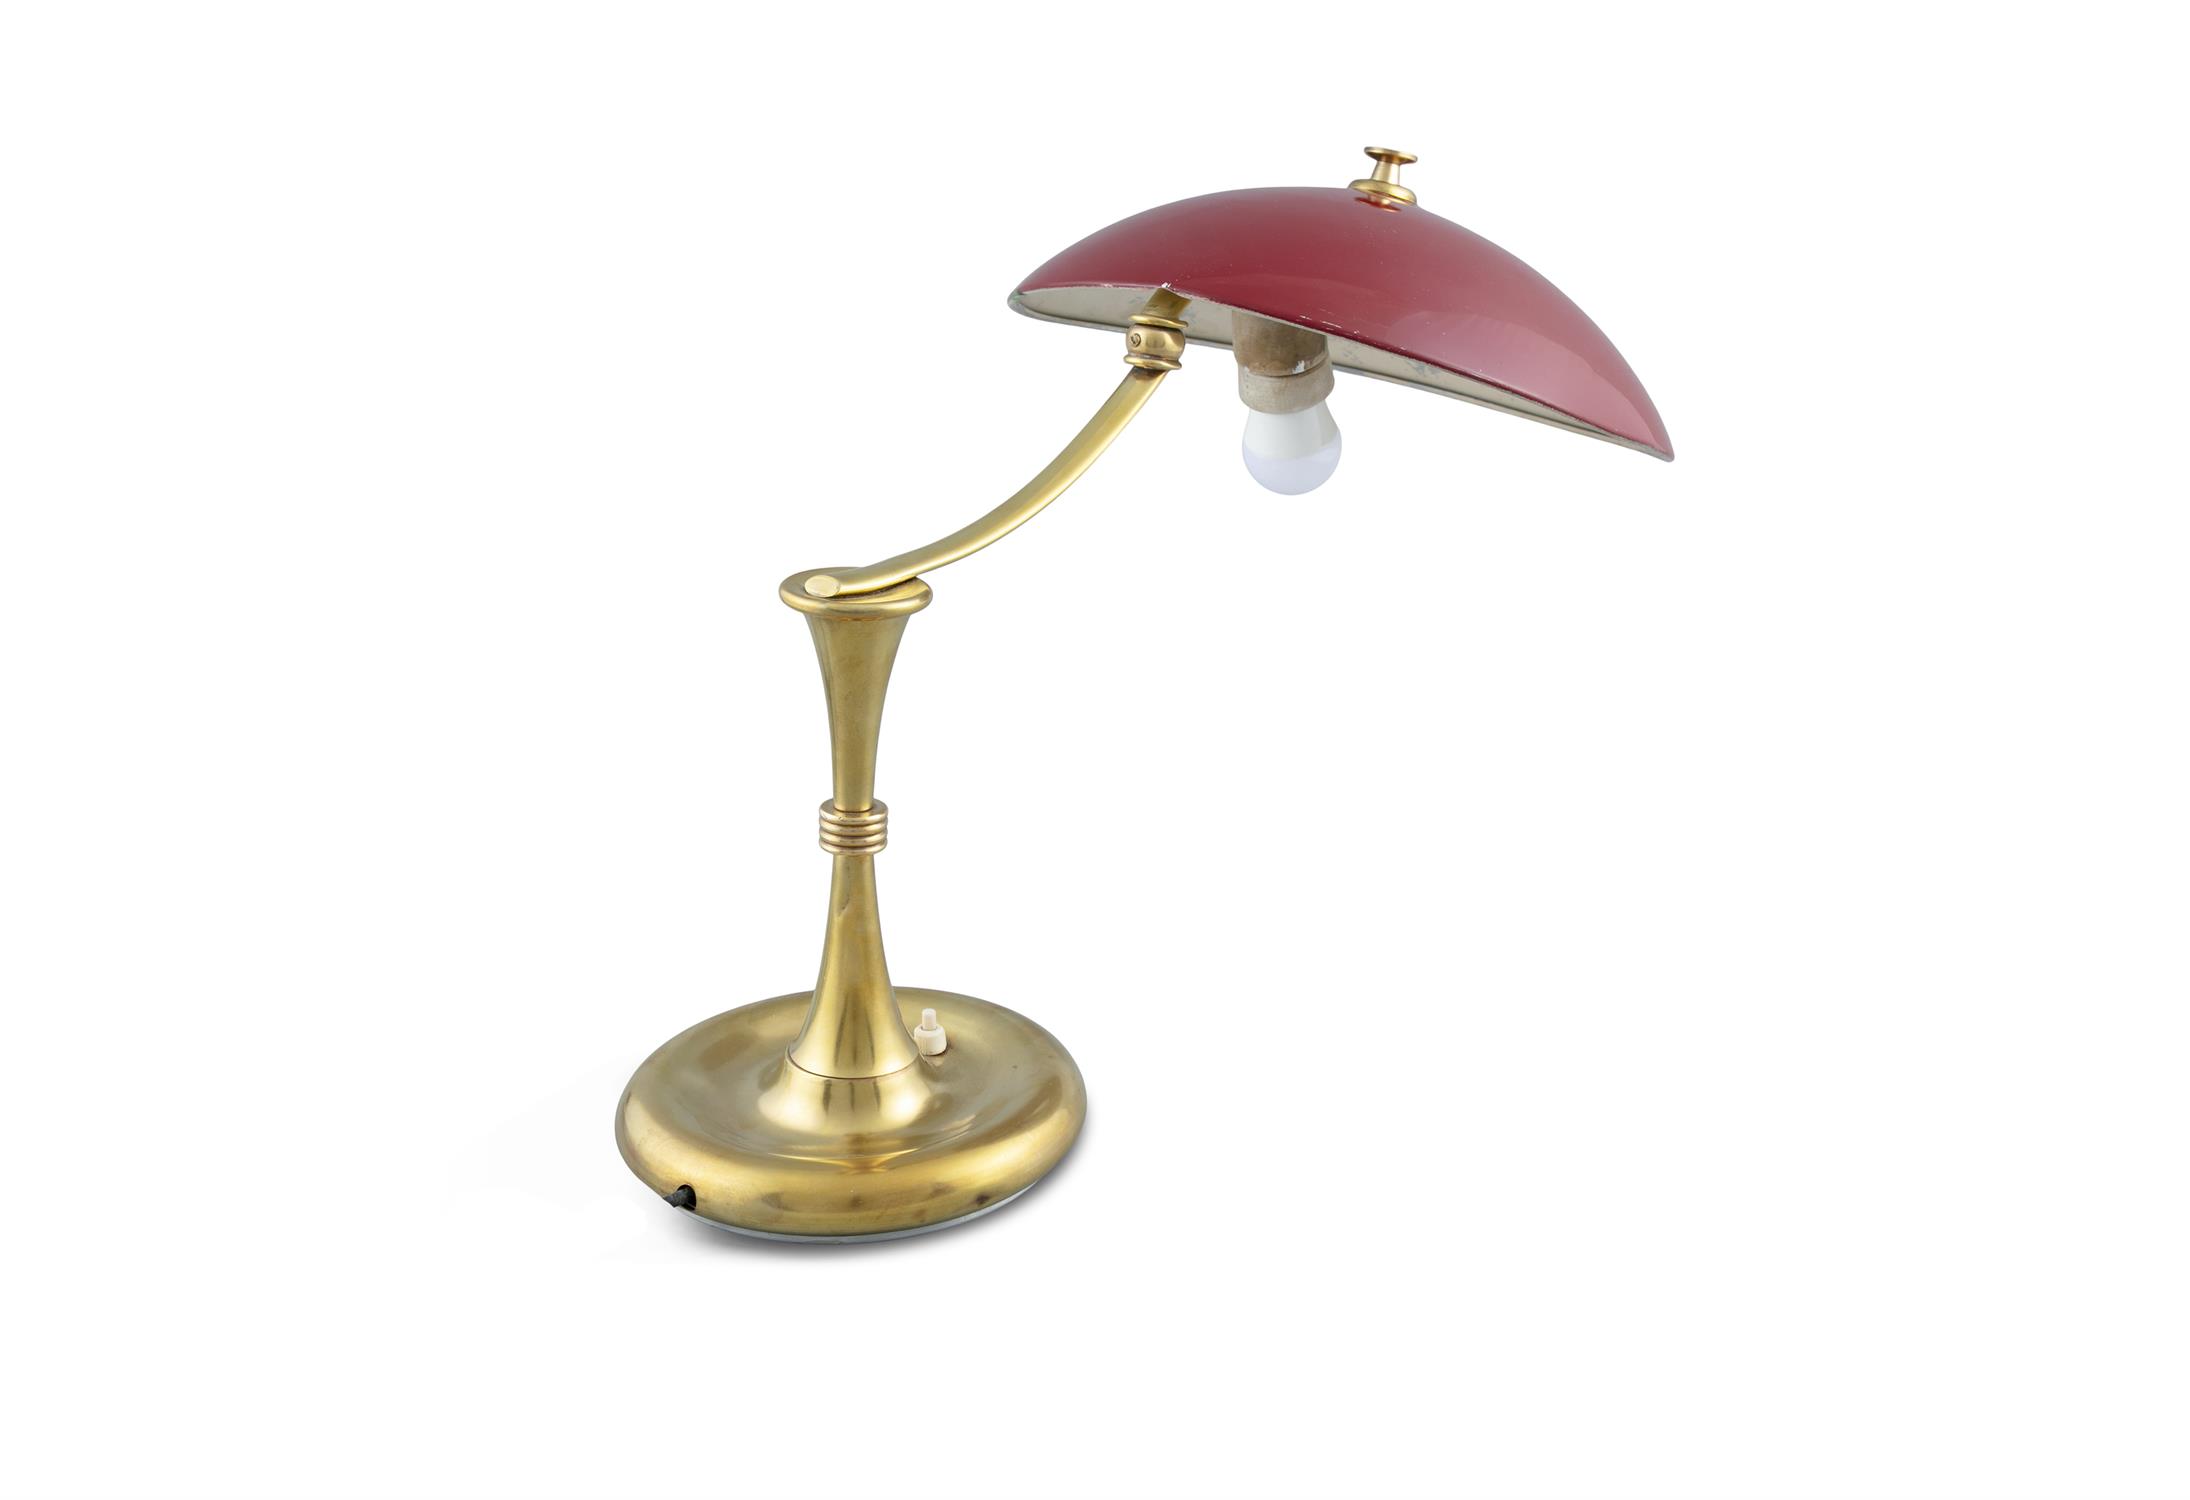 LAMP A brass and enamel desk lamp, Italy c.1960. 39cm (h) - Image 4 of 4